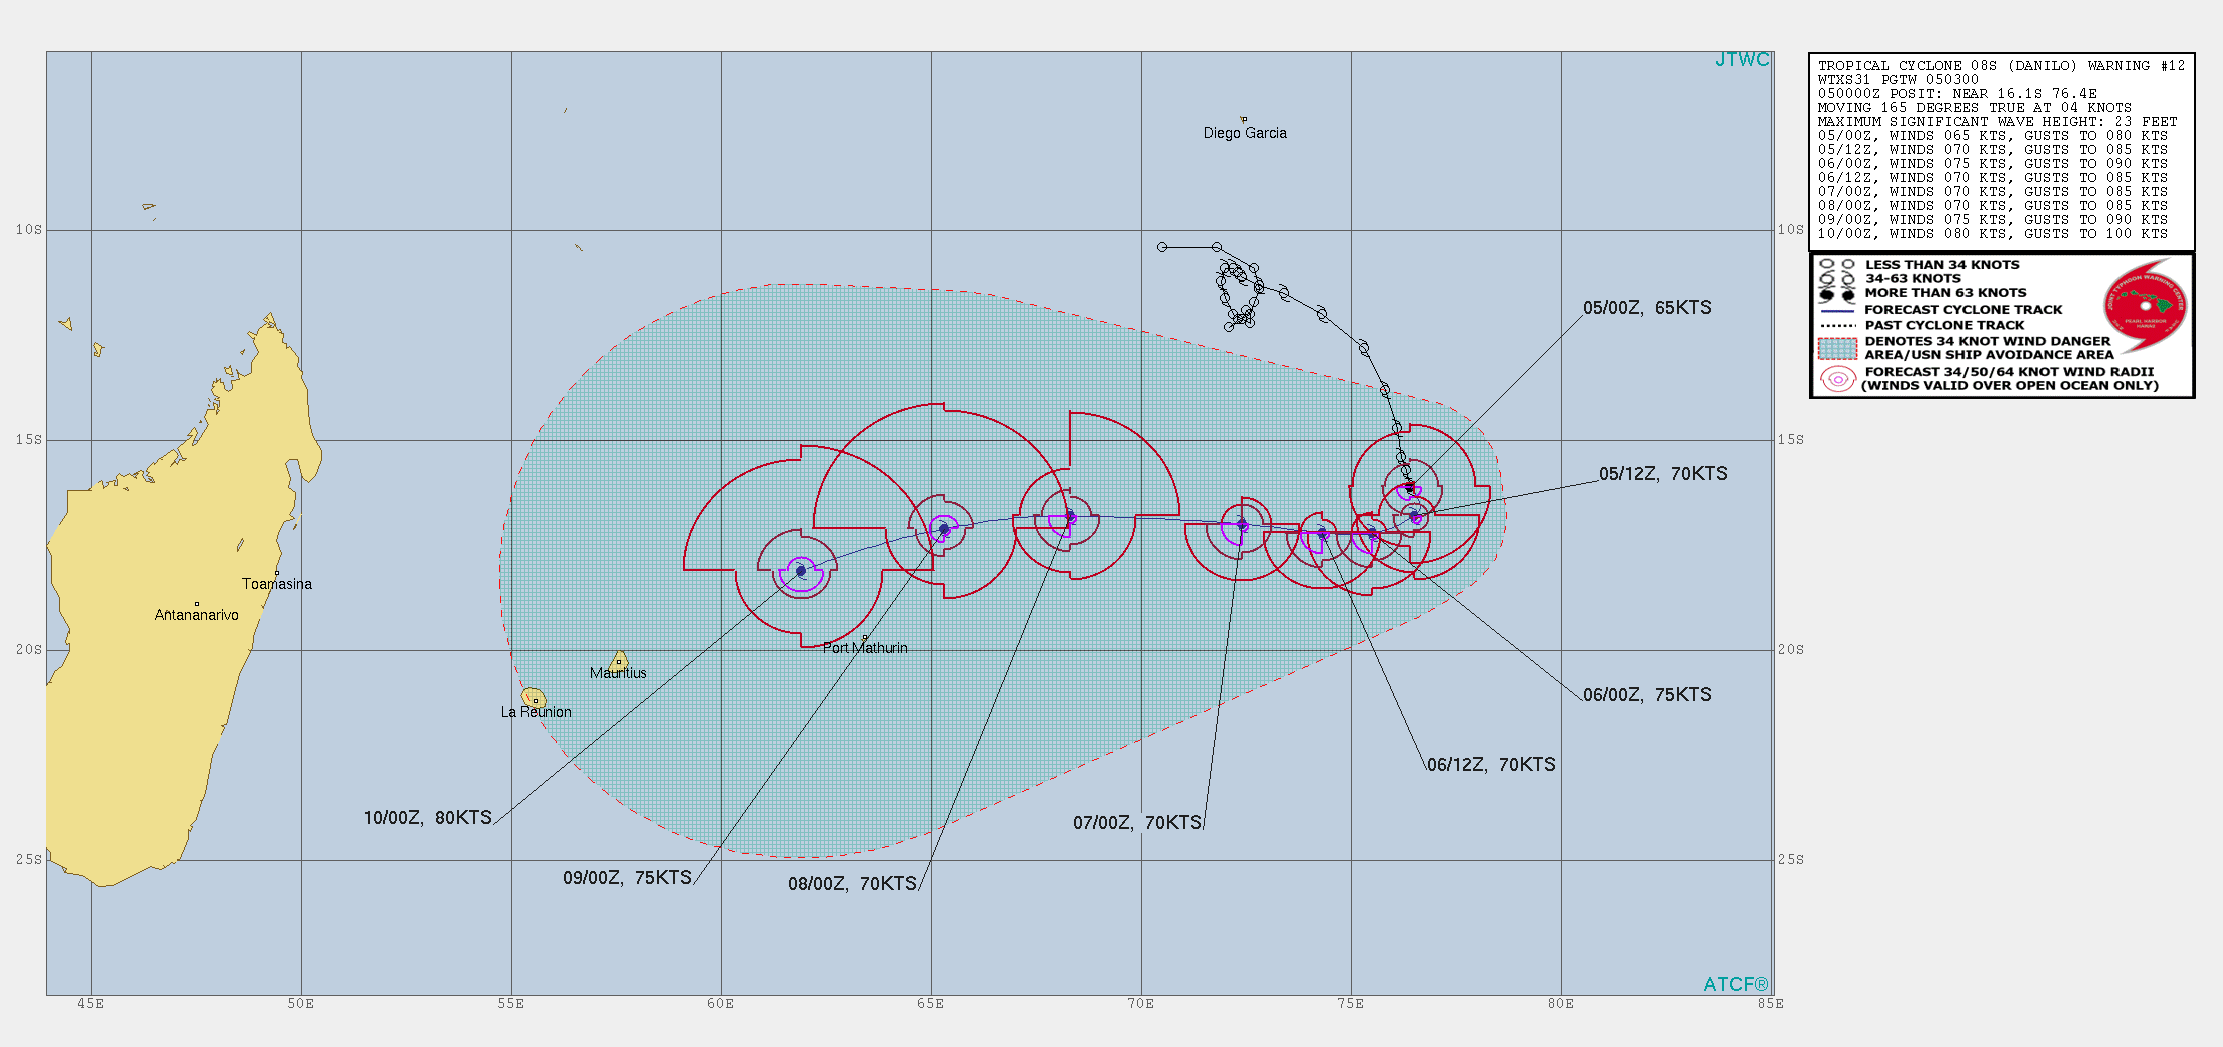 OVER THE NEXT 12 HOURS TC 08S IS  FORECAST TO TRACK SOUTHWARD AND THEN TURN SOUTHWESTWARD.BY 24H THE SYSTEM WILL BEGIN A WESTWARD  TRAJECTORY THAT WILL CONTINUE THROUGH 96H.IN THE NEAR TERM TC  DANILO IS FORECAST TO INTENSIFY 12H, POSSIBLY RAPIDLY,  DUE TO CONTINUED FAVORABLE ENVIRONMENTAL CONDITIONS. THEREAFTER THE  SYSTEM WILL WEAKEN SLIGHTLY BETWEEN 24 AND 36H.AFTER 96H TC  DANILO WILL BEGIN A GENERALLY SOUTHWESTWARD TRACK.IMPROVING OUTFLOW  ALOFT DURING THIS TIME WILL LEAD TO GRADUAL INTENSIFICATION  THROUGHOUT THE REMAINDER OF THE FORECAST PERIOD TO 80 KNOTS BY 120H.